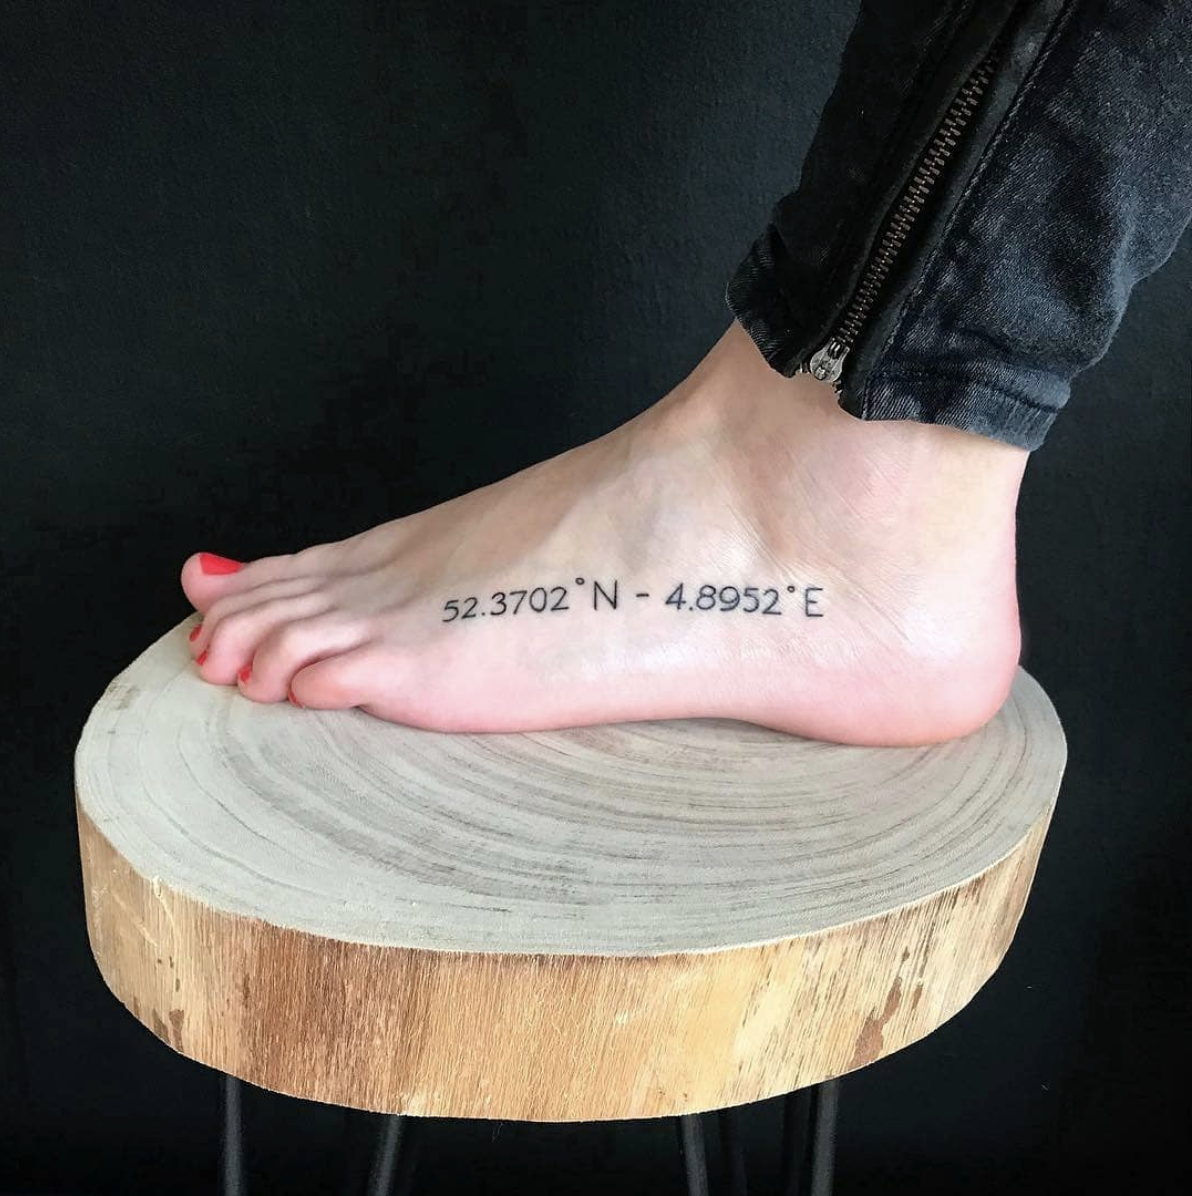 17 'Unique' Tattoo Ideas Tattoo Artists Are Sick To Death Of Doing